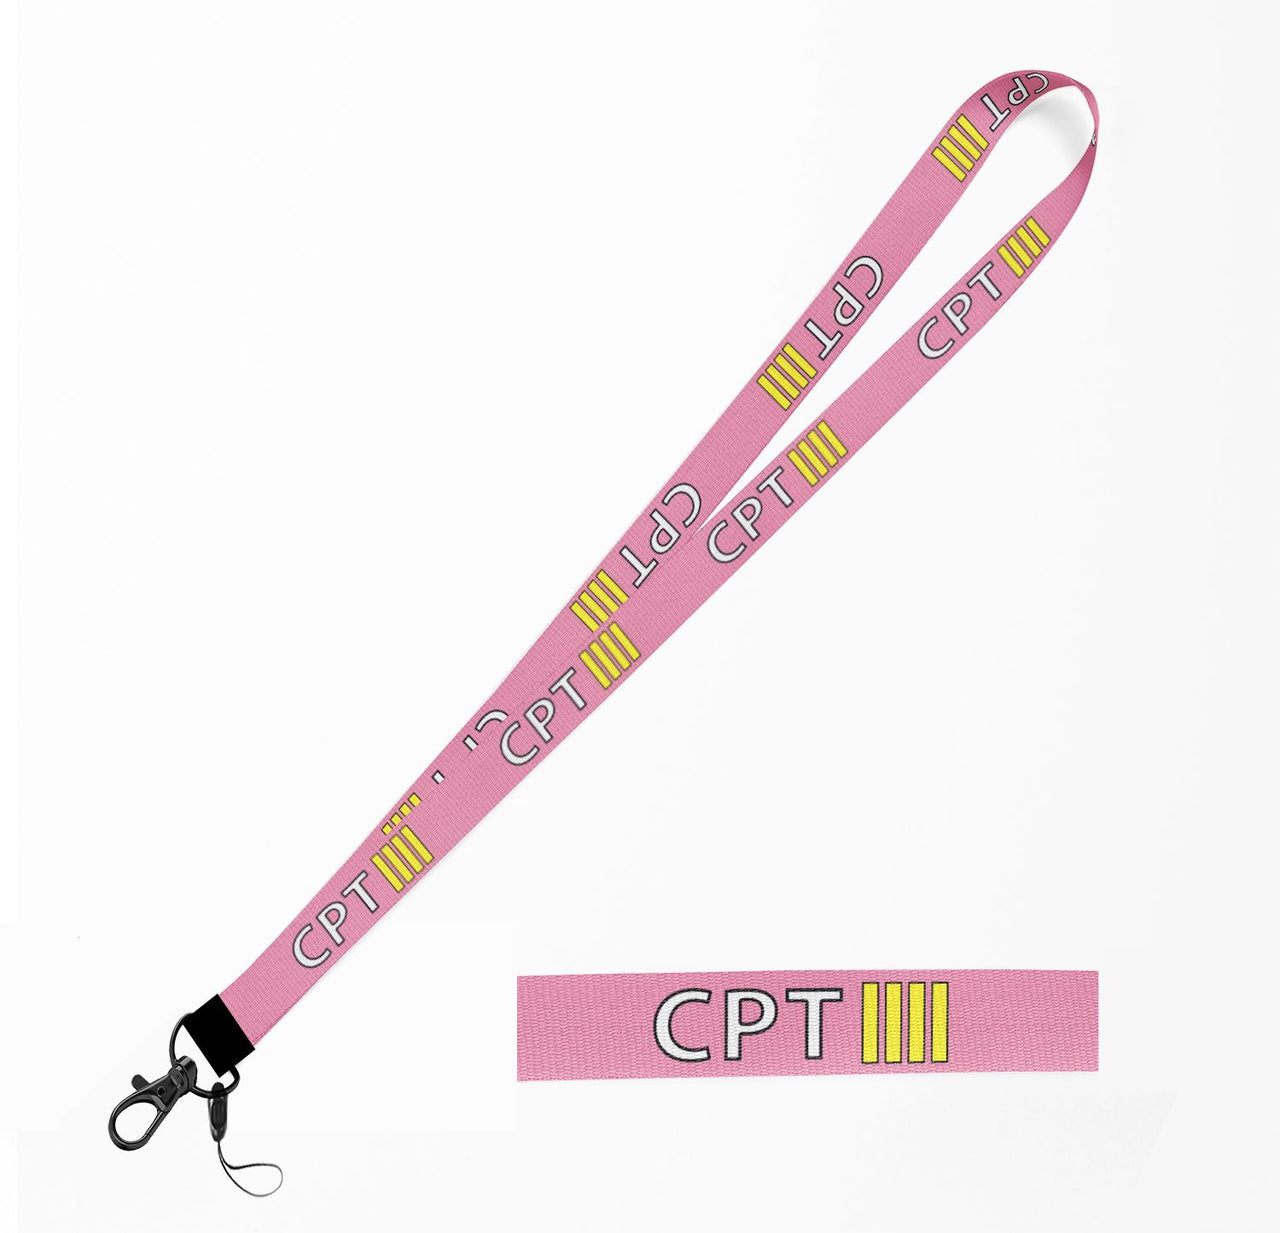 CPT & 4 Lines Designed Lanyard & ID Holders